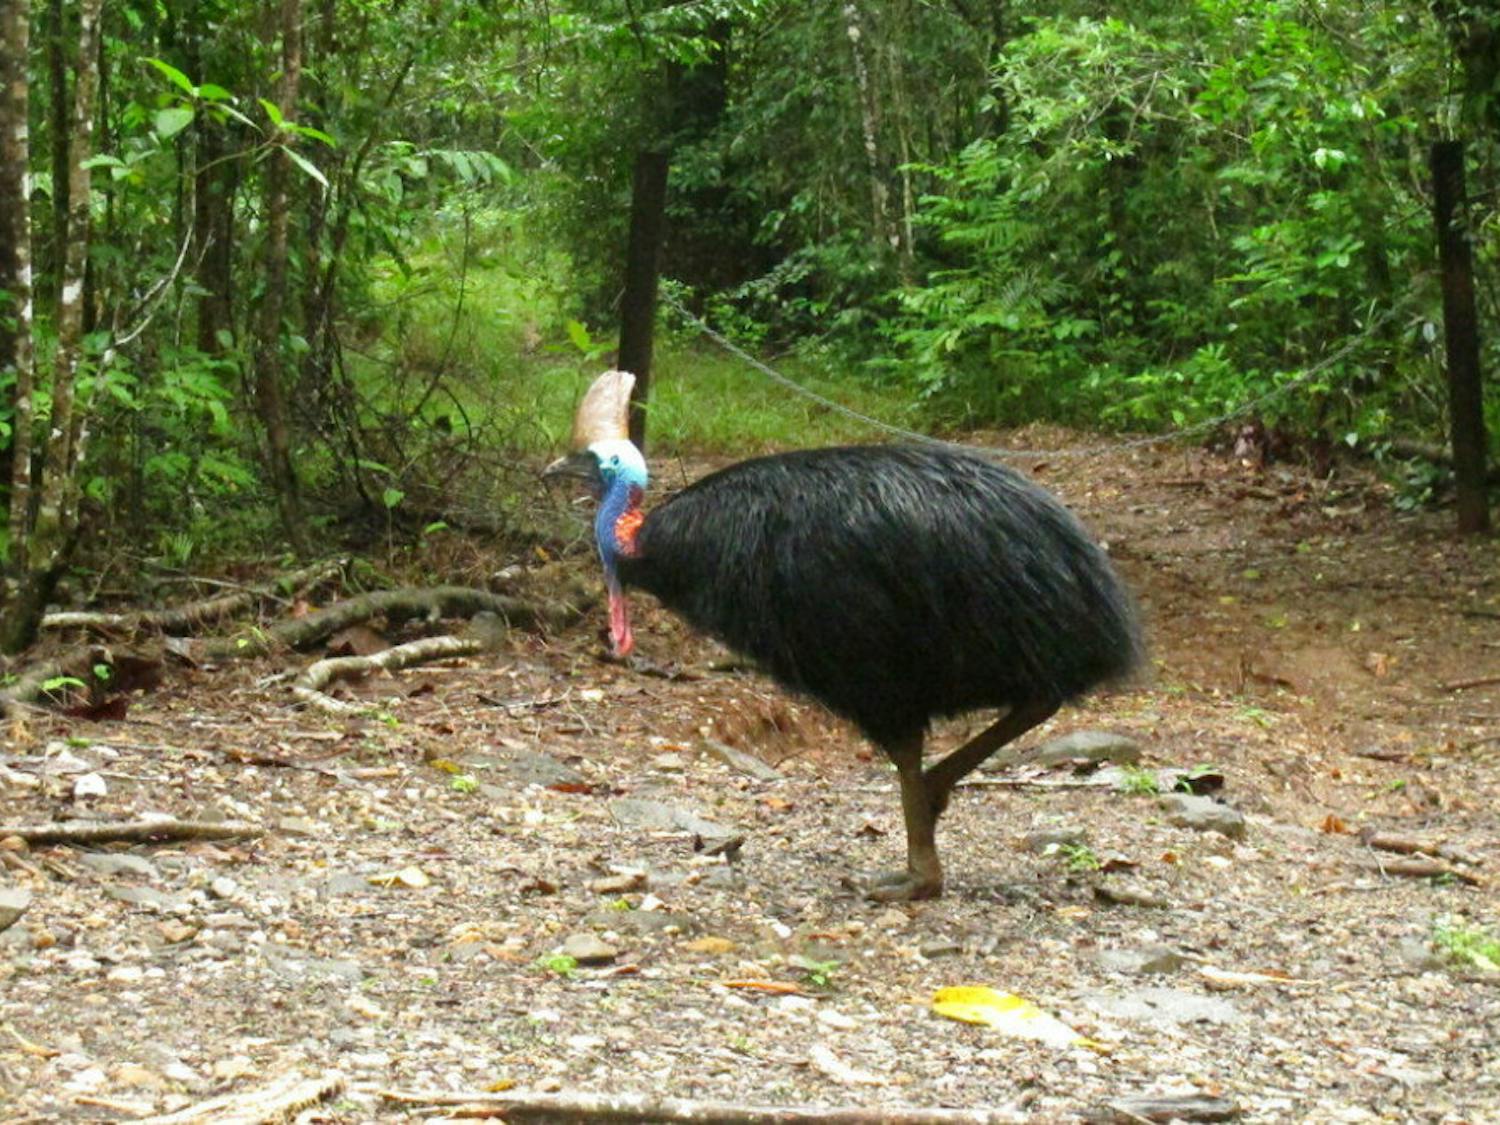 FILE - In this June 30, 2015, file photo, an endangered cassowary roams in the Daintree National Forest, Australia. On Friday, April 12, 2019, a cassowary, a large, flightless bird native to Australia and New Guinea, killed its owner when it attacked him after he fell on his property near Gainesville, Fla. Cassowaries are similar to emus and stand up to 6 feet (1.8 meters) tall and weigh up to 130 pounds (59 kilograms). (AP Photo/Wilson Ring, File)